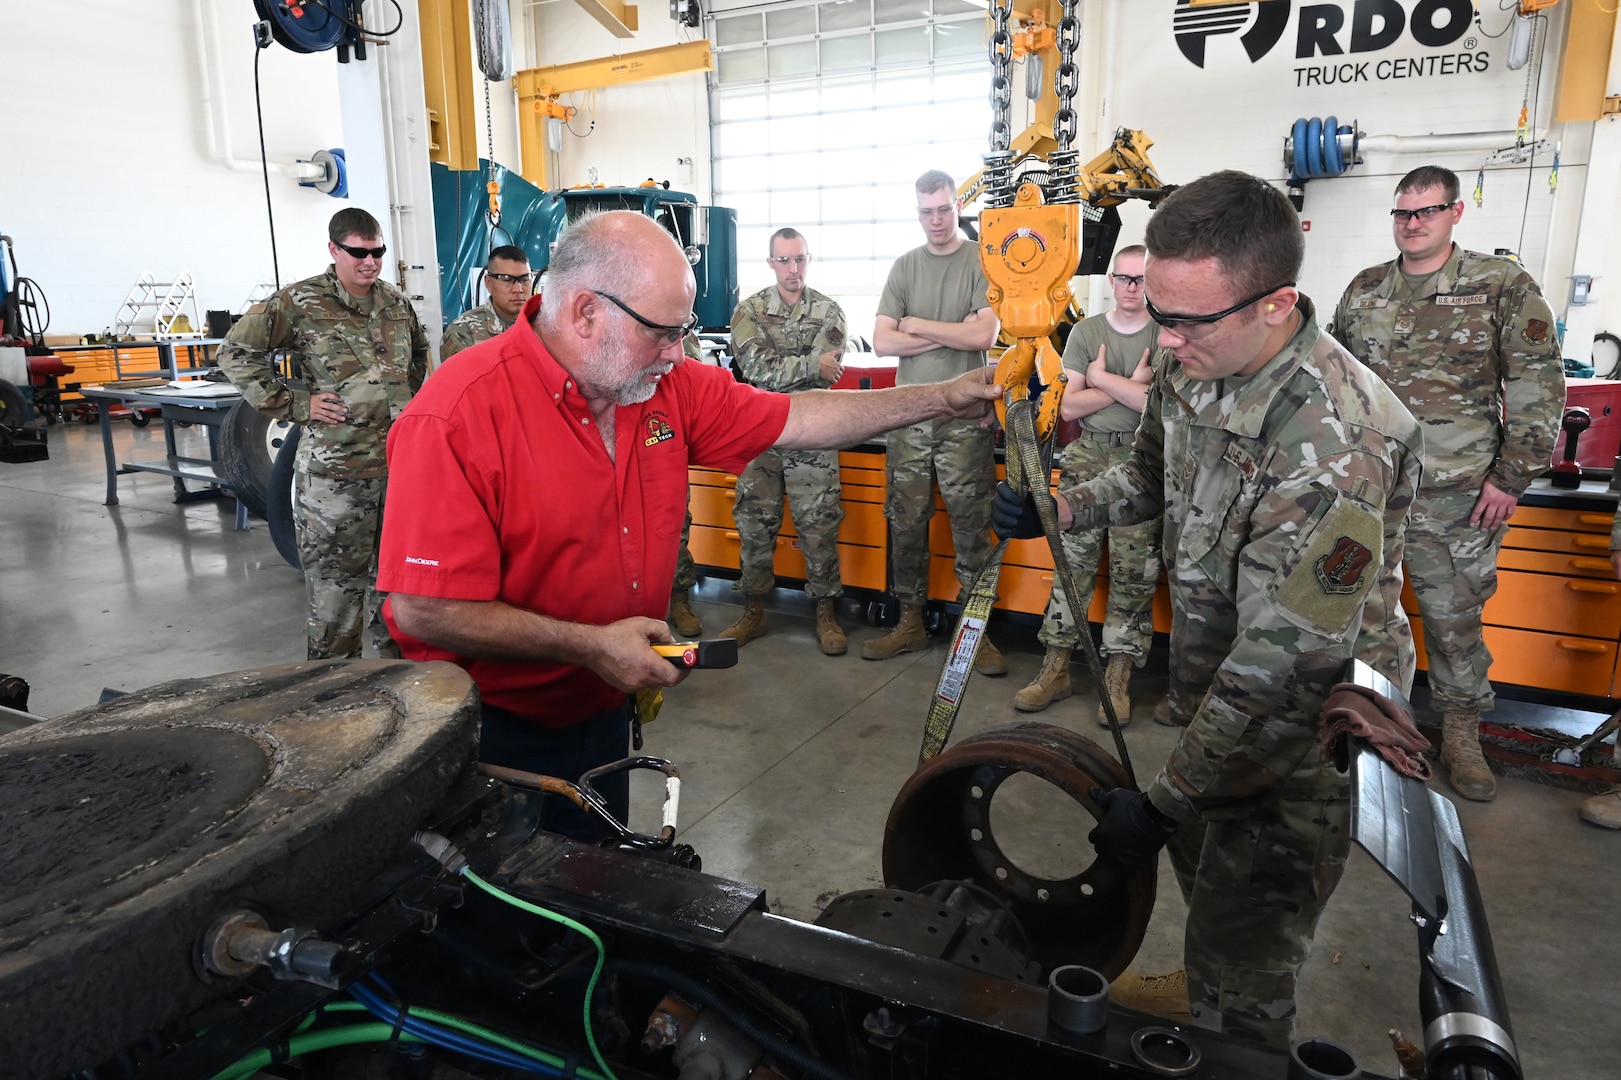 Air brake systems instructor Jim Bainer, red shirt, directs Airman 1st Class Mason Heimkes, of the 119th Logistics Readiness Squadron, as he provides instruction for Air National Guard students in the ‘lab’ training at Minnesota State Community College (M State), Moorhead, Minn., July 22, 2021.